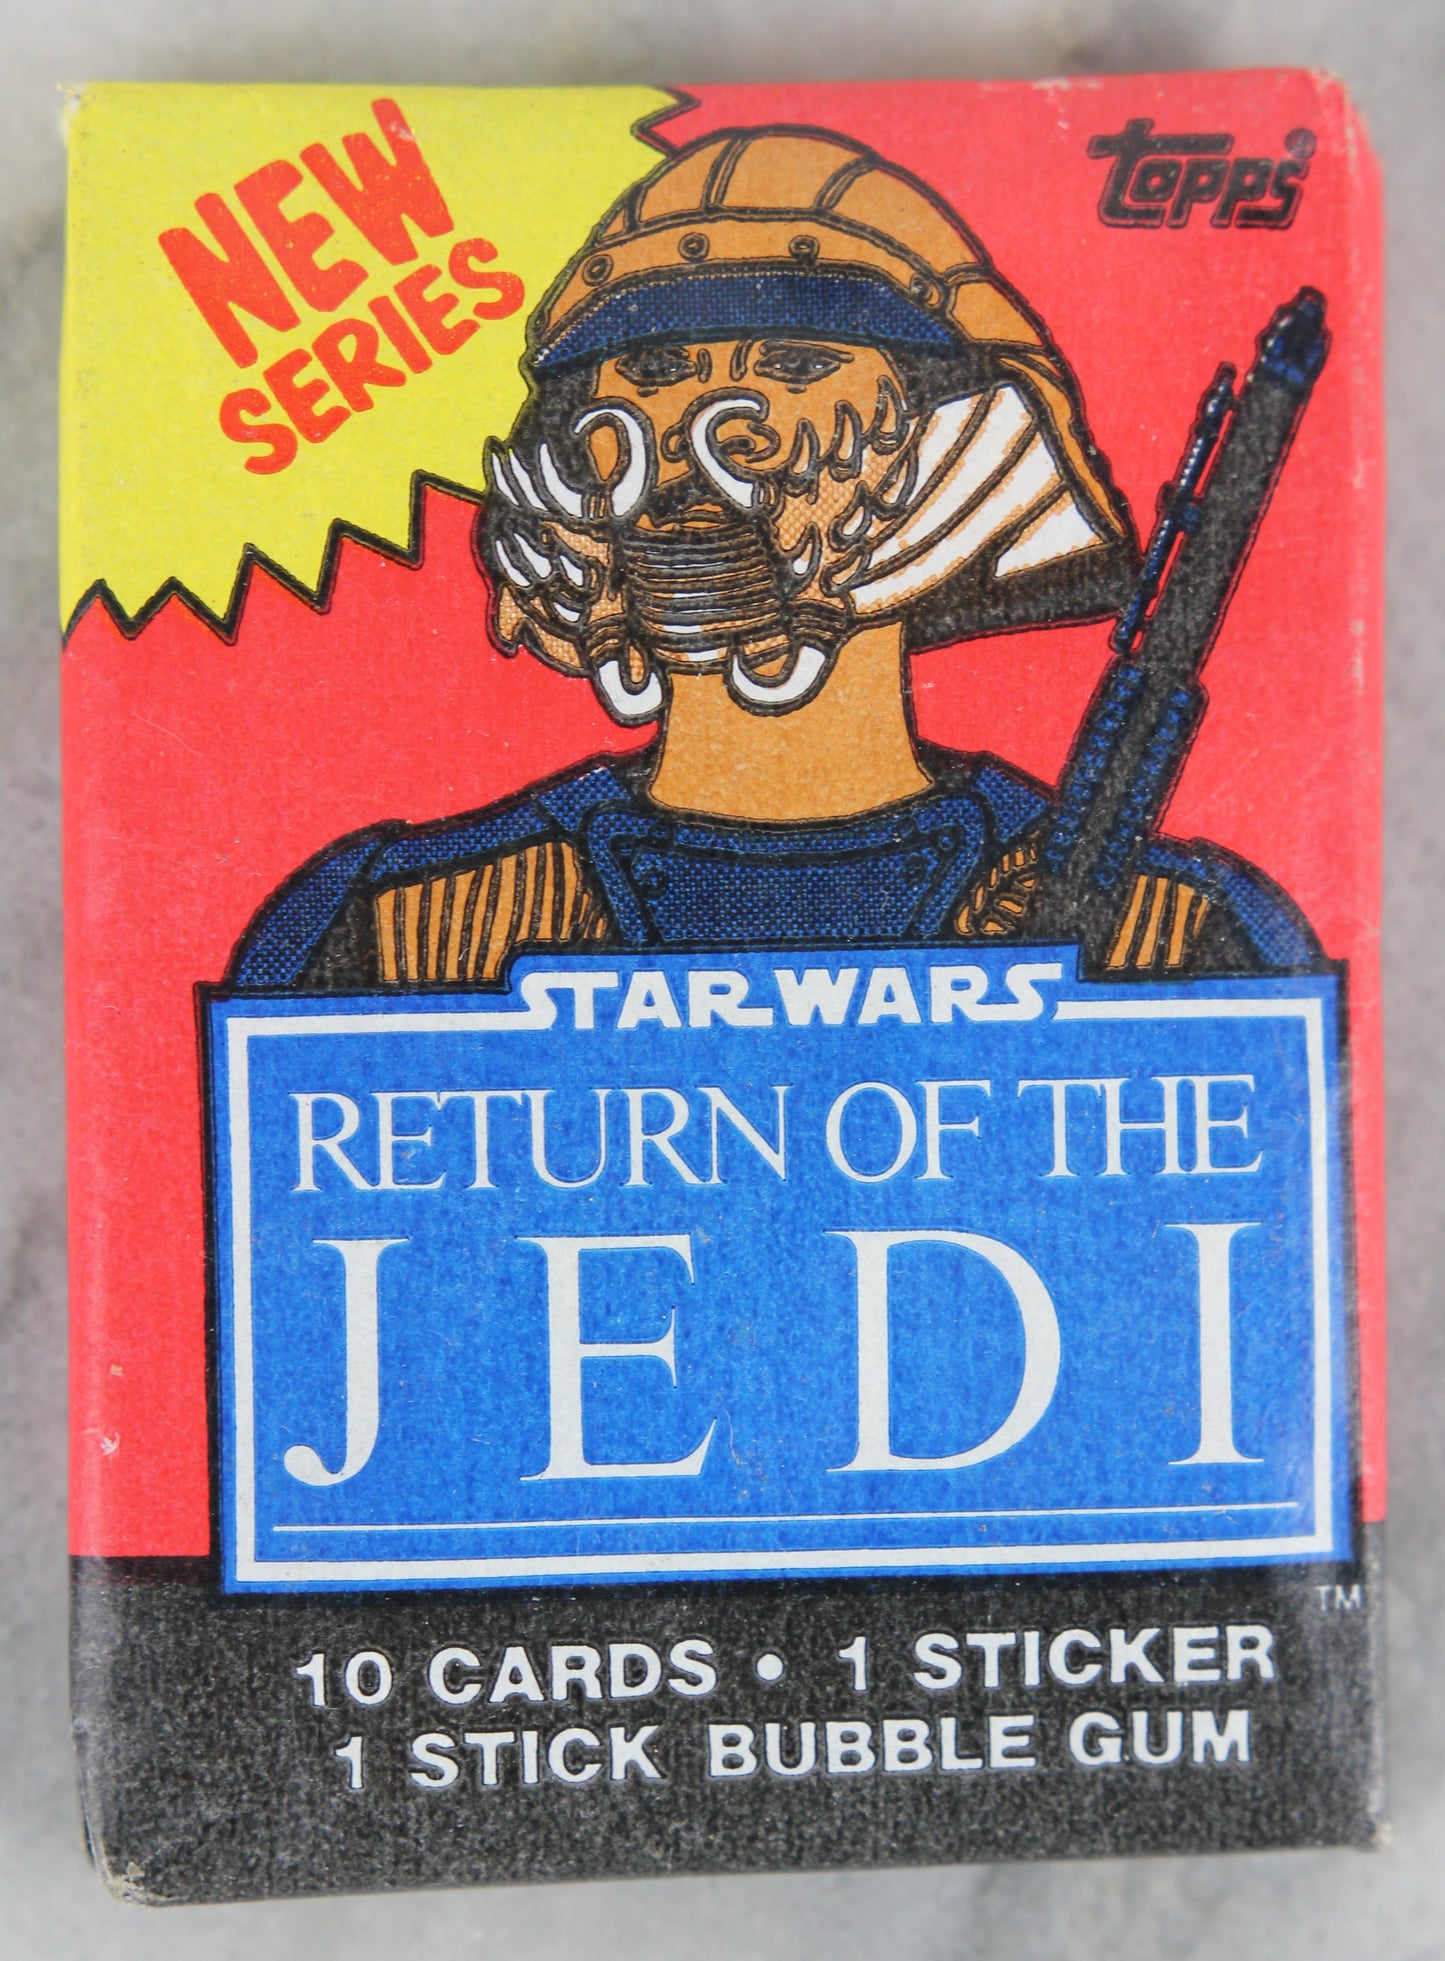 Topps Star Wars Return of the Jedi Series 2 Collectible Trading Cards, One Wax Pack, Lando Calrissian Wrapper, 1983